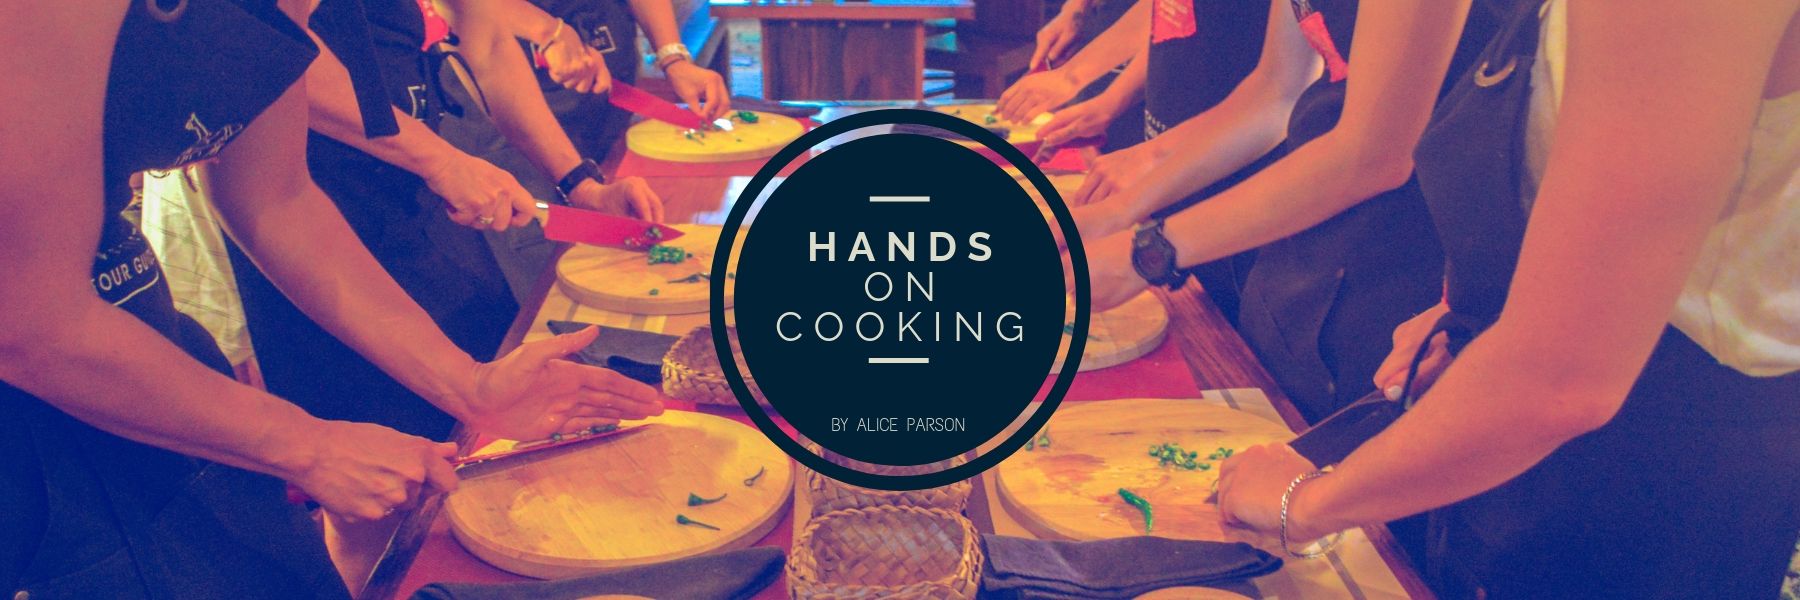 Hands On Cooking Class, Where to take Cooking Class in Sri Lanka